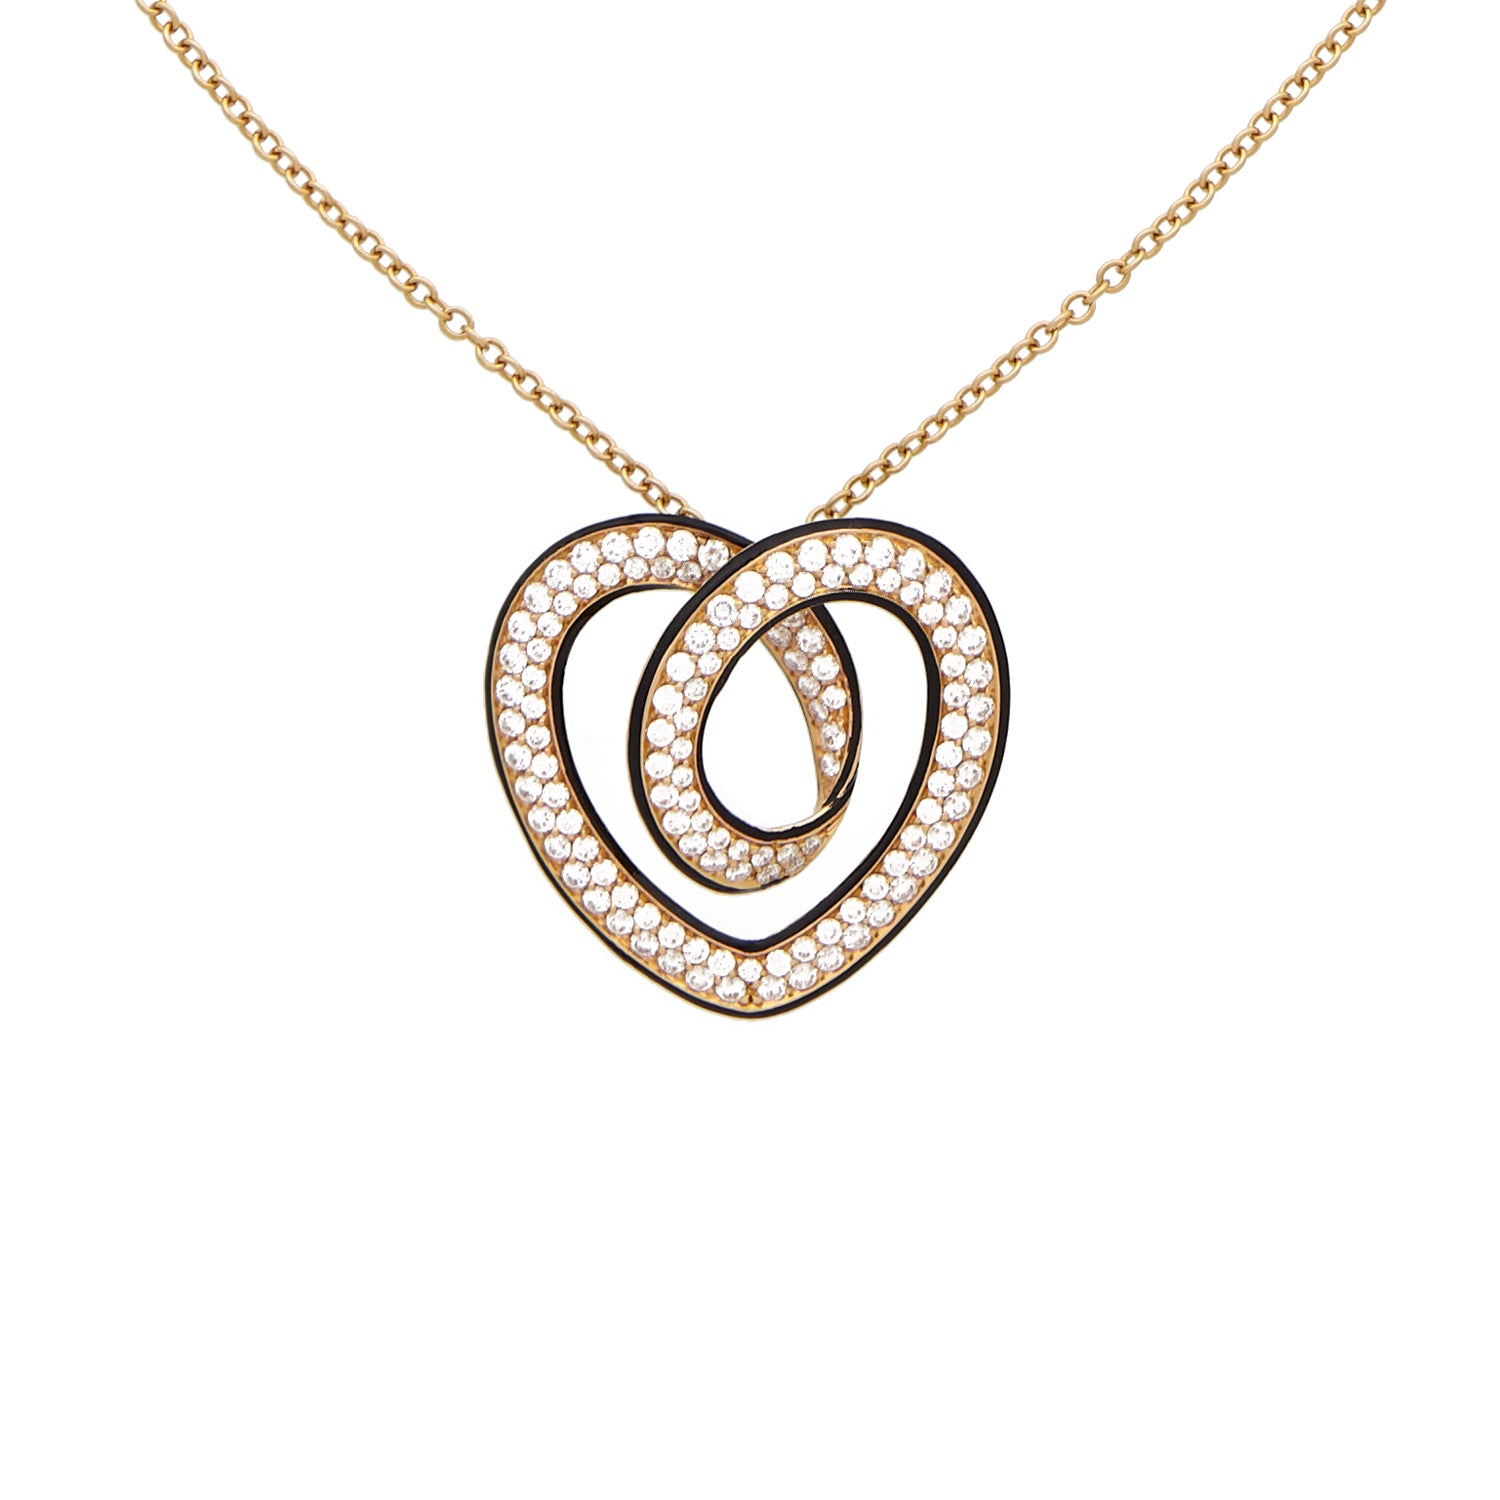 ROSE GOLD NECKLACE WITH DIAMOND HEART